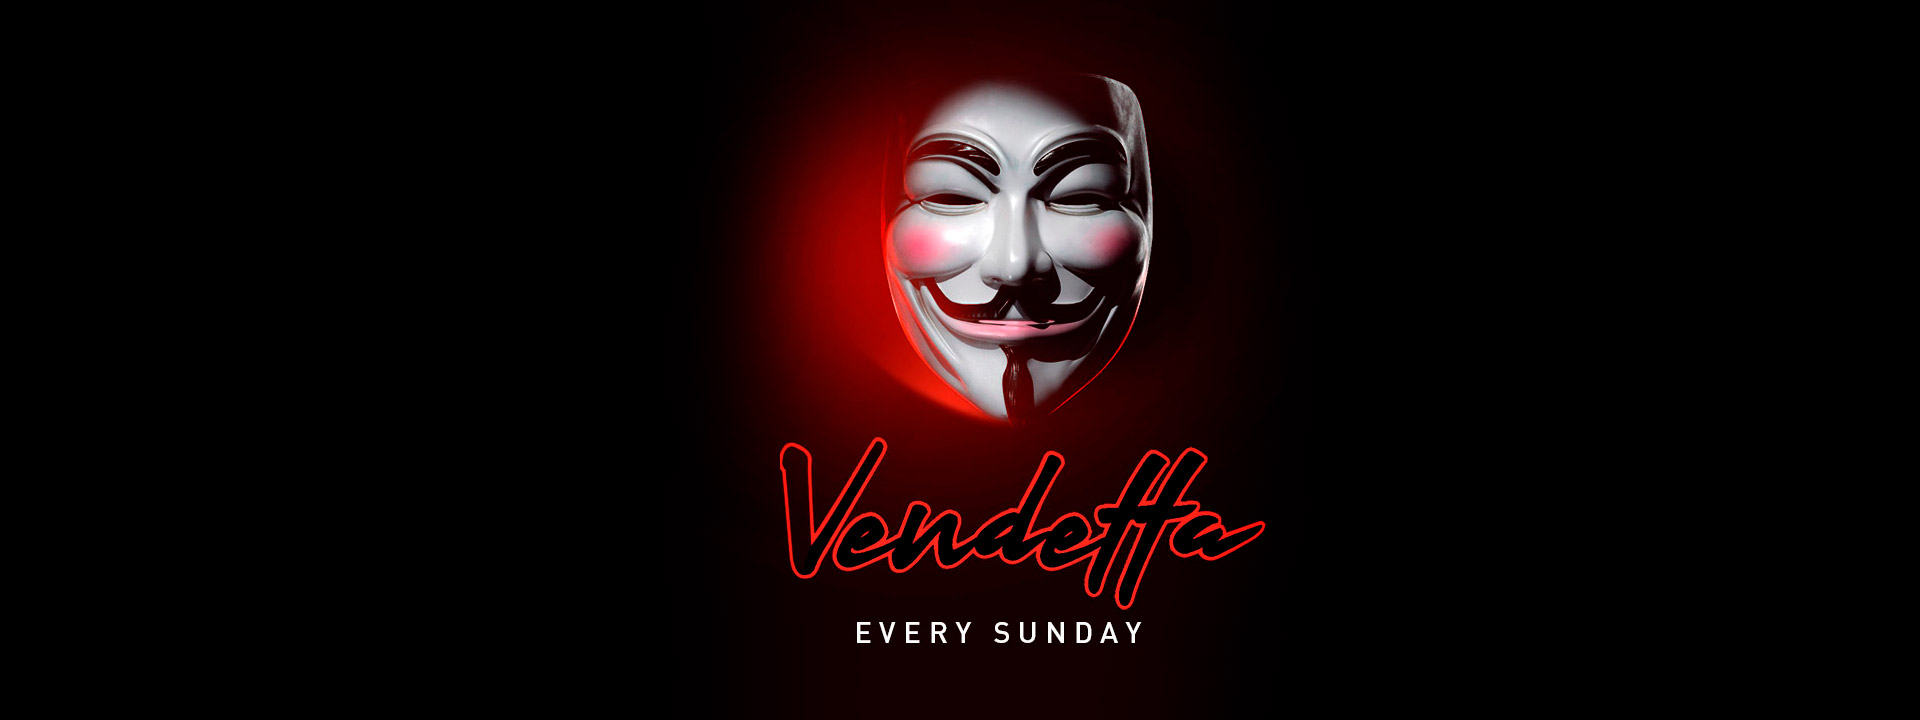 vendetta party every Sunday. Click to buy tickets online